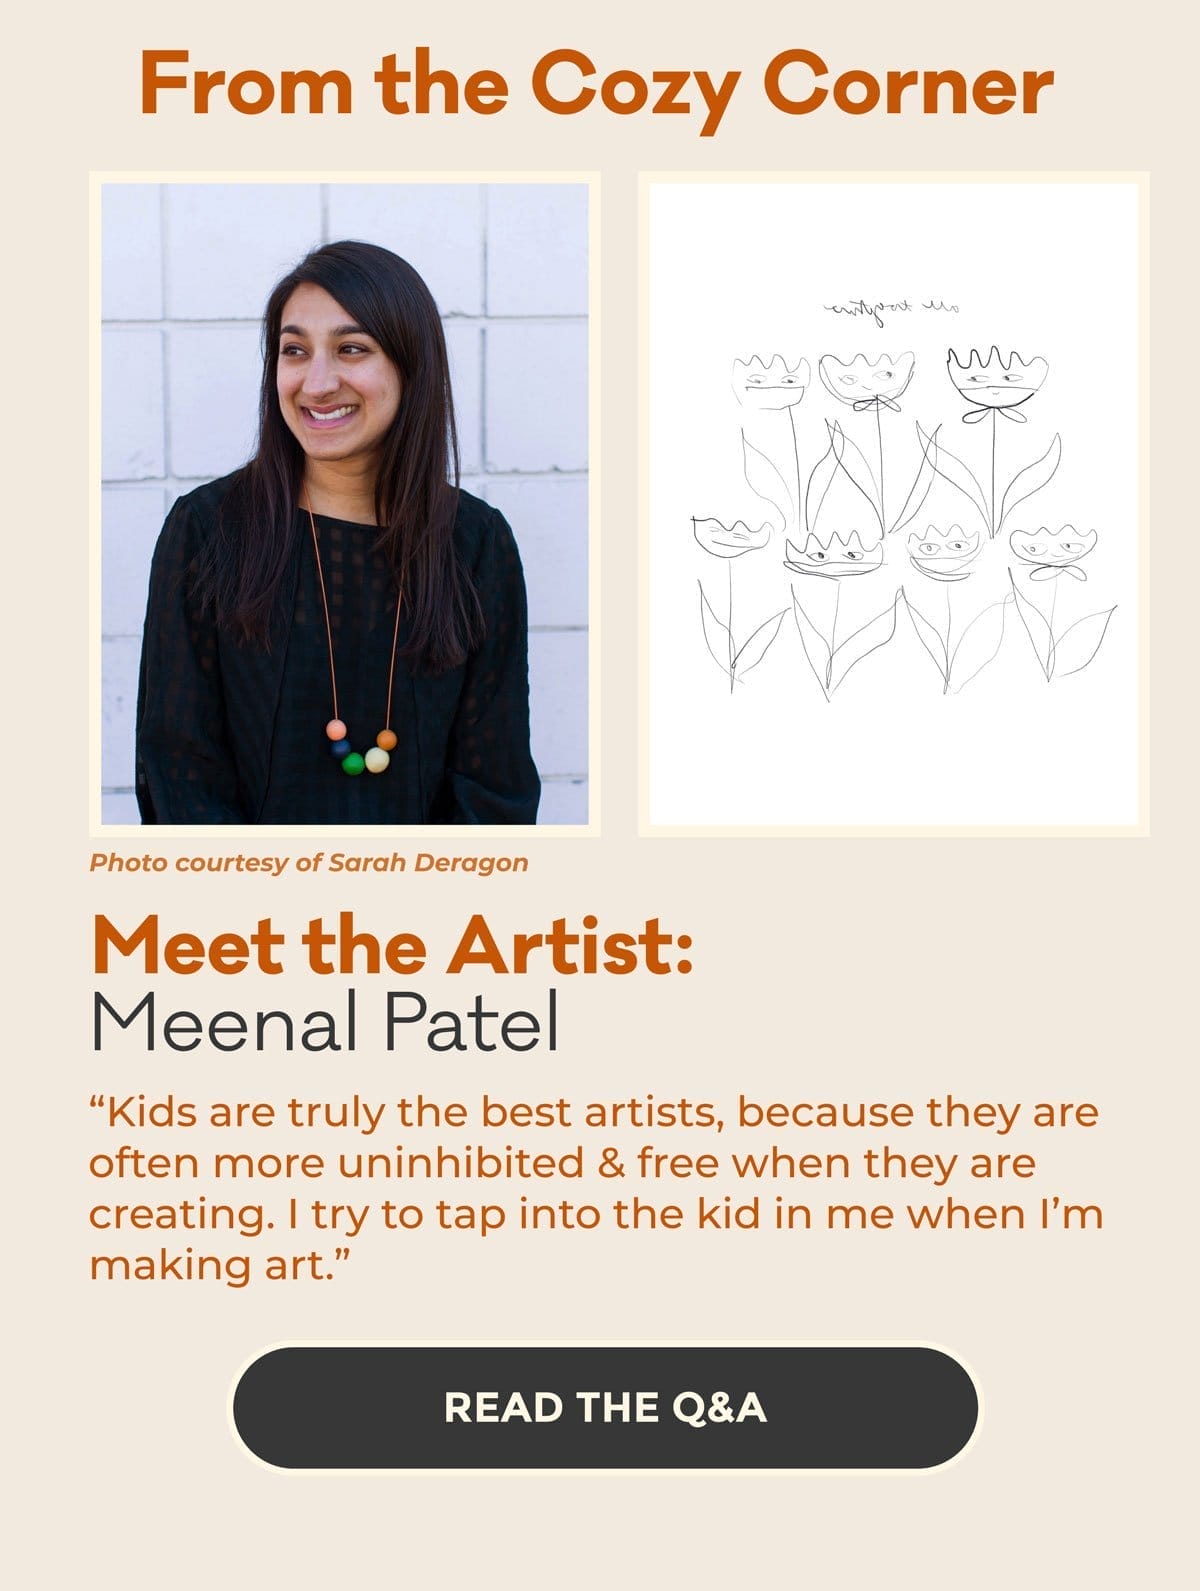 From the Cozy Corner | Meet the Artist Meenal Patel | "Kids are truley the best artists, because they are often more uninhibited & free when they are creating. I try to tap into the kid in me when I'm making art." | READ THE Q&A